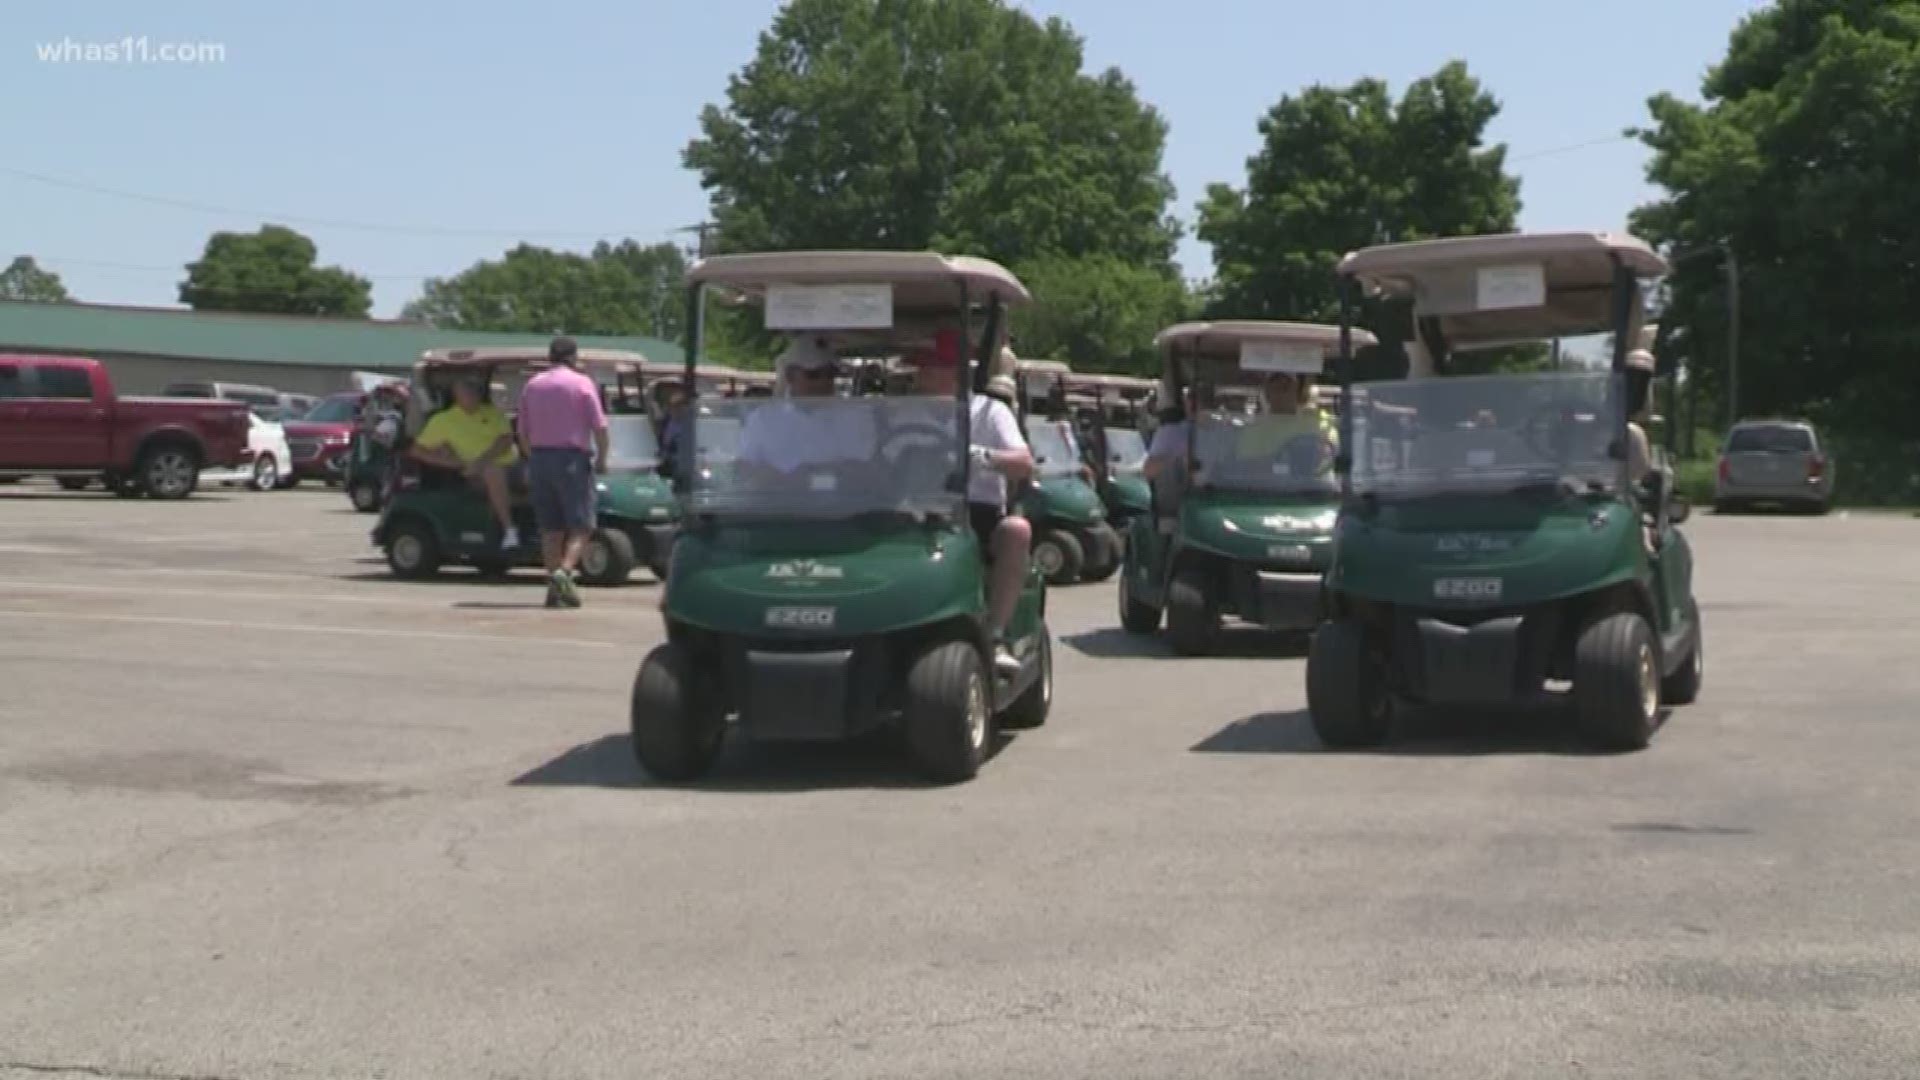 24 teams hit the links at Jeffersonville's Elk Run Golf Club for the 5th annual Ted Throckmorton Crusade Golf Tournament.